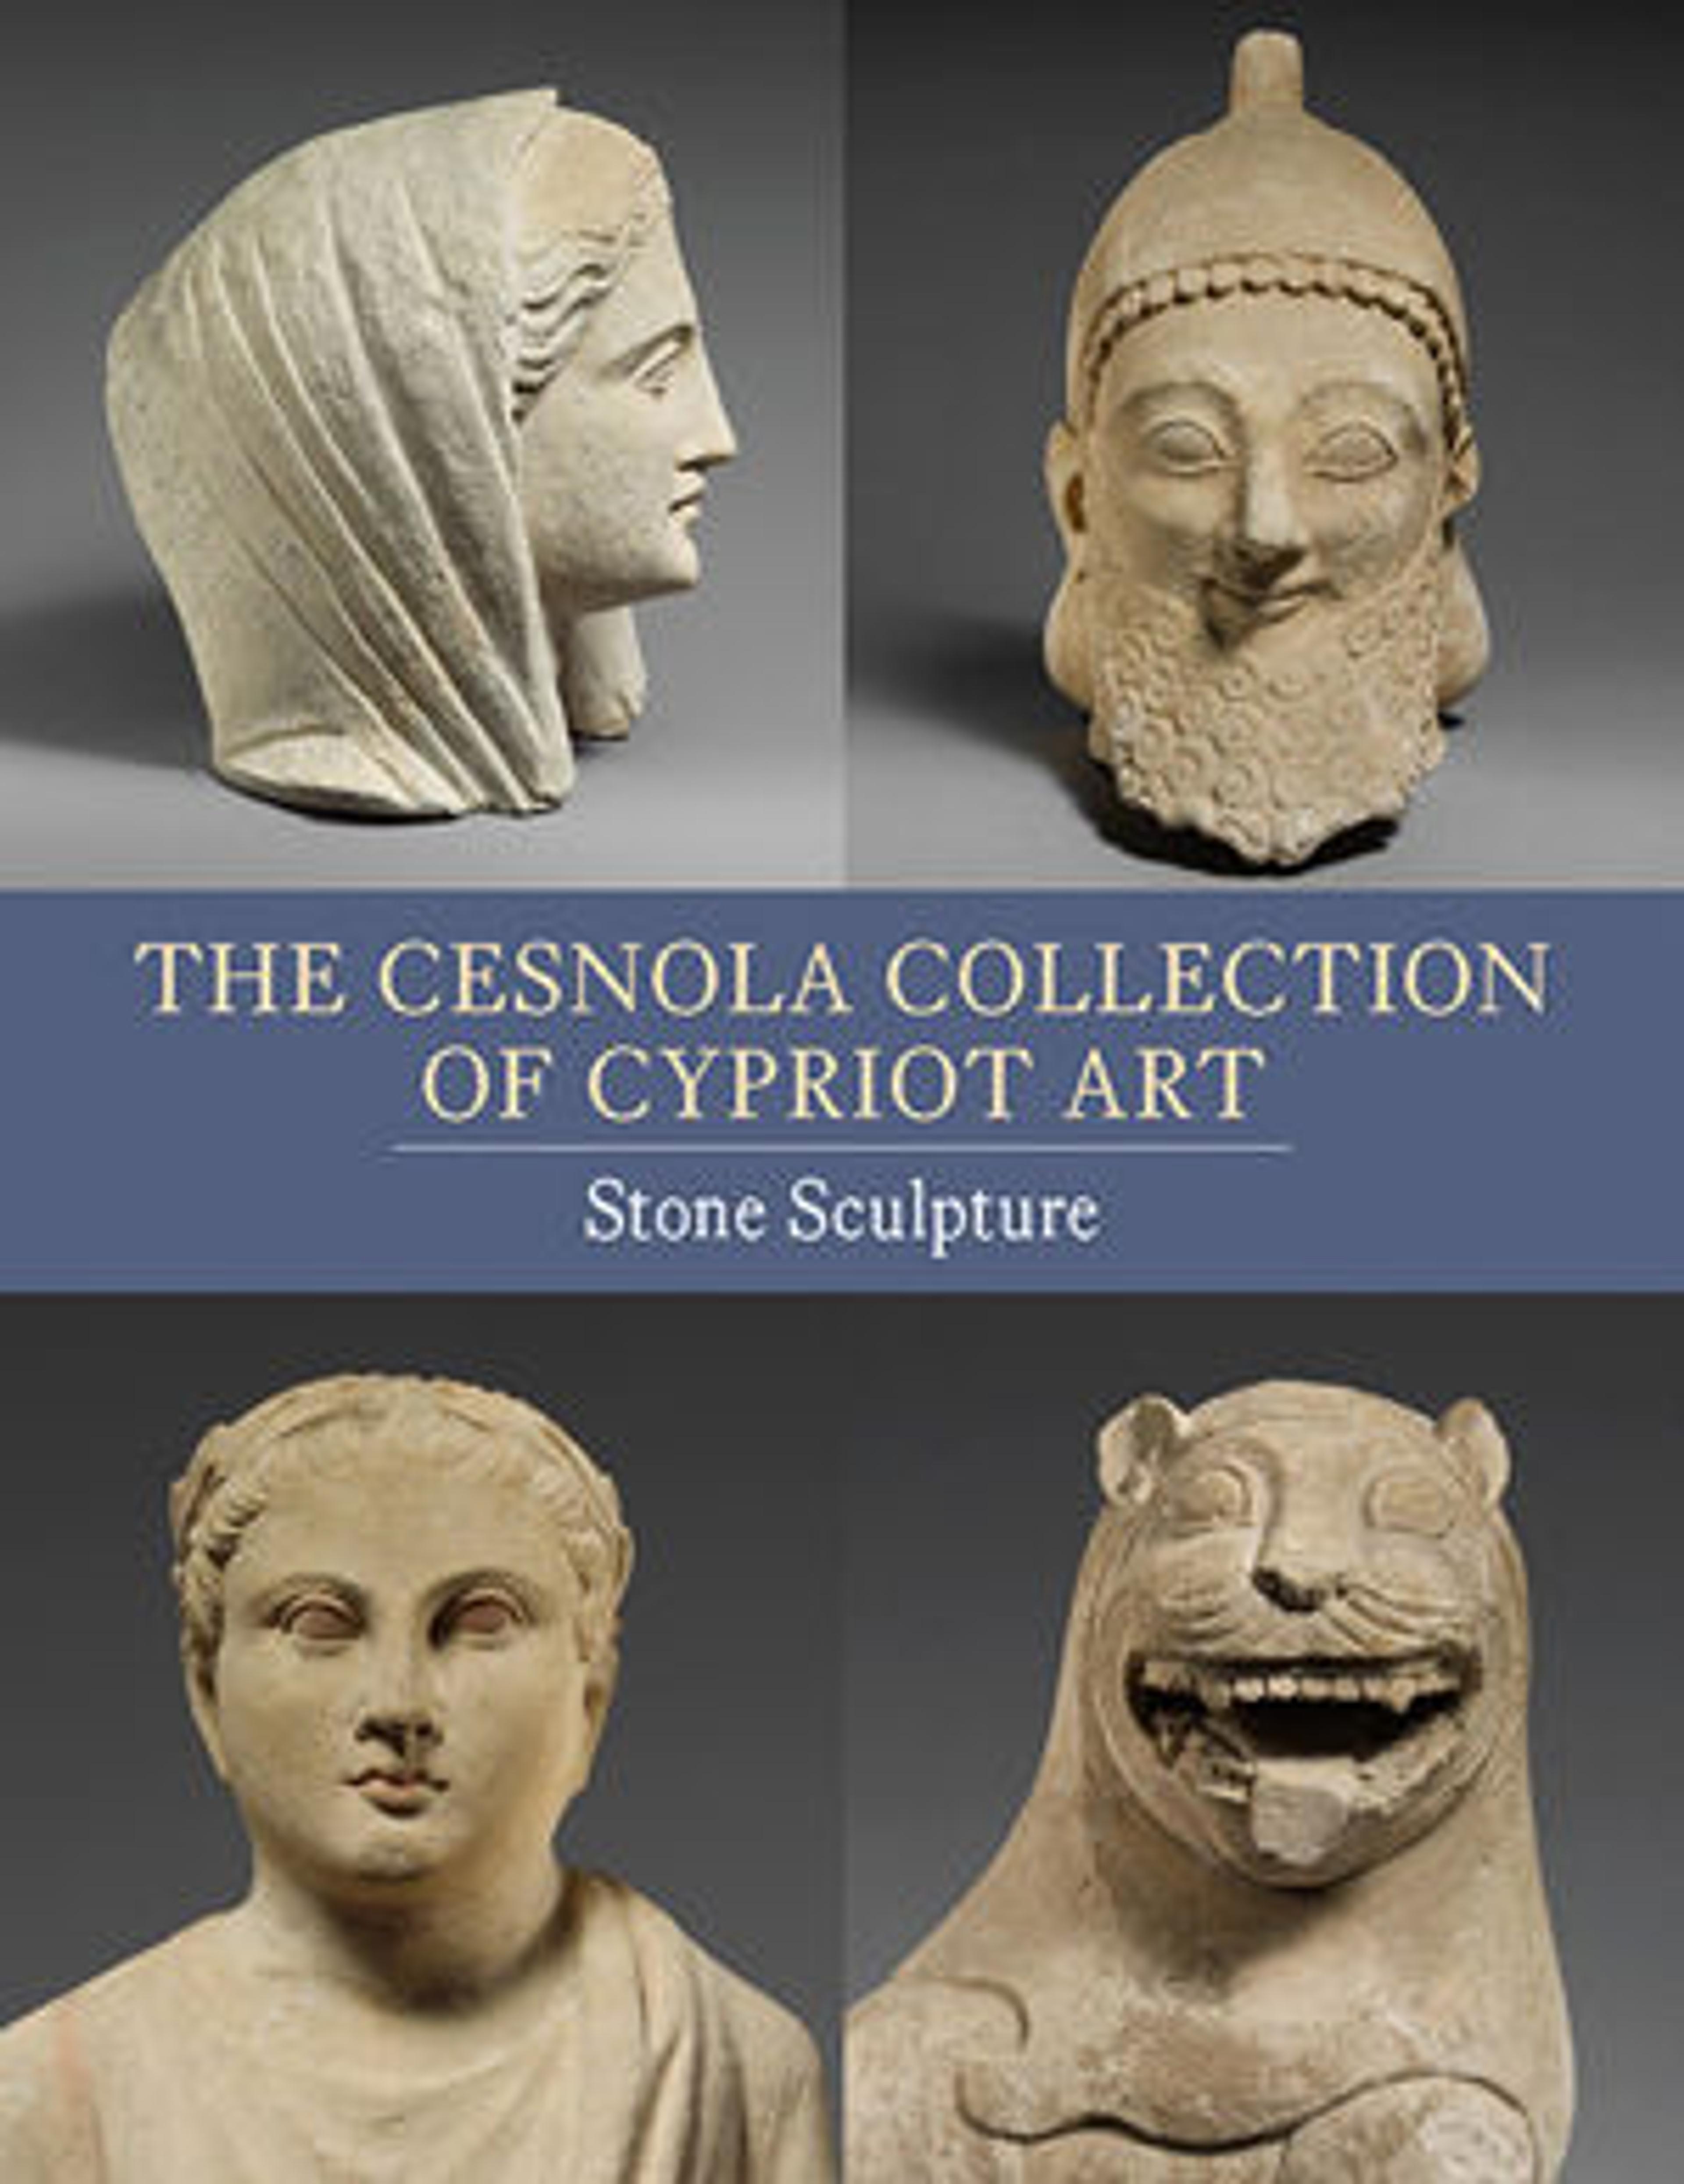 The Cesnola Collection of Cypriot Art: Stone Sculpture by Antoine Hermary and Joan R. Mertens